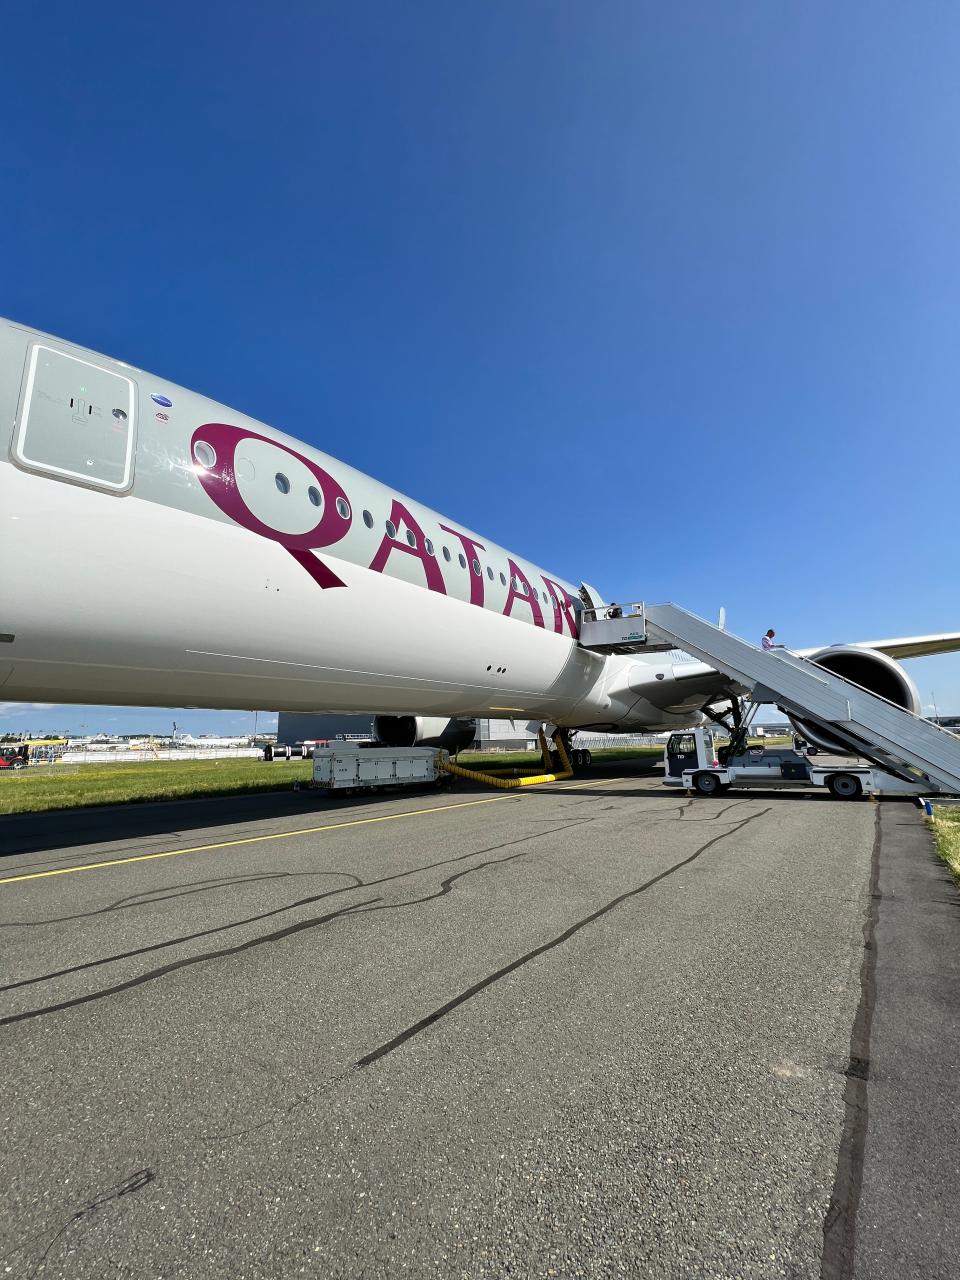 A wide-angle view shows the Qatar Airways logo on an Airbus A350 parked on the tarmac, and the stairs leading up to it.